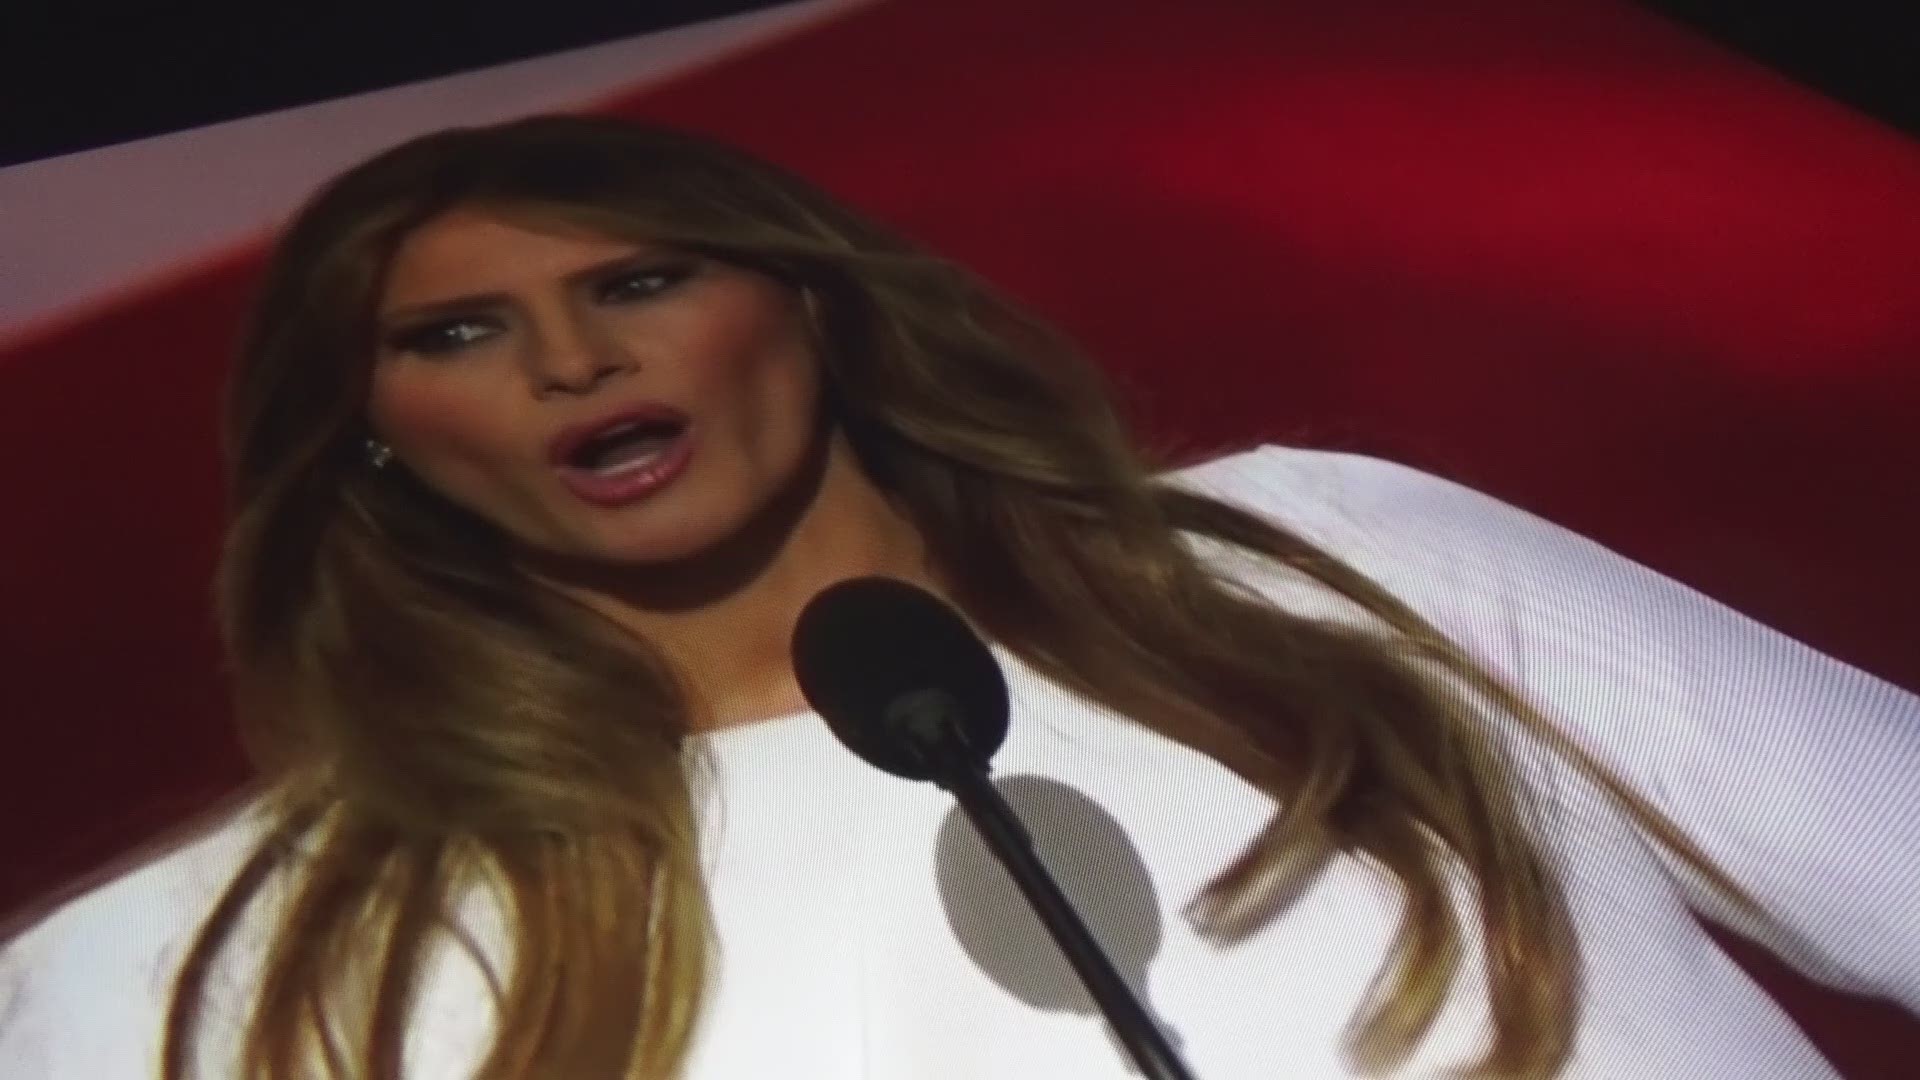 The woman who has taken responsibility for the Melania Trump plagiarism scandal at the Republican National Convention is a registered Democrat, according to an online database.